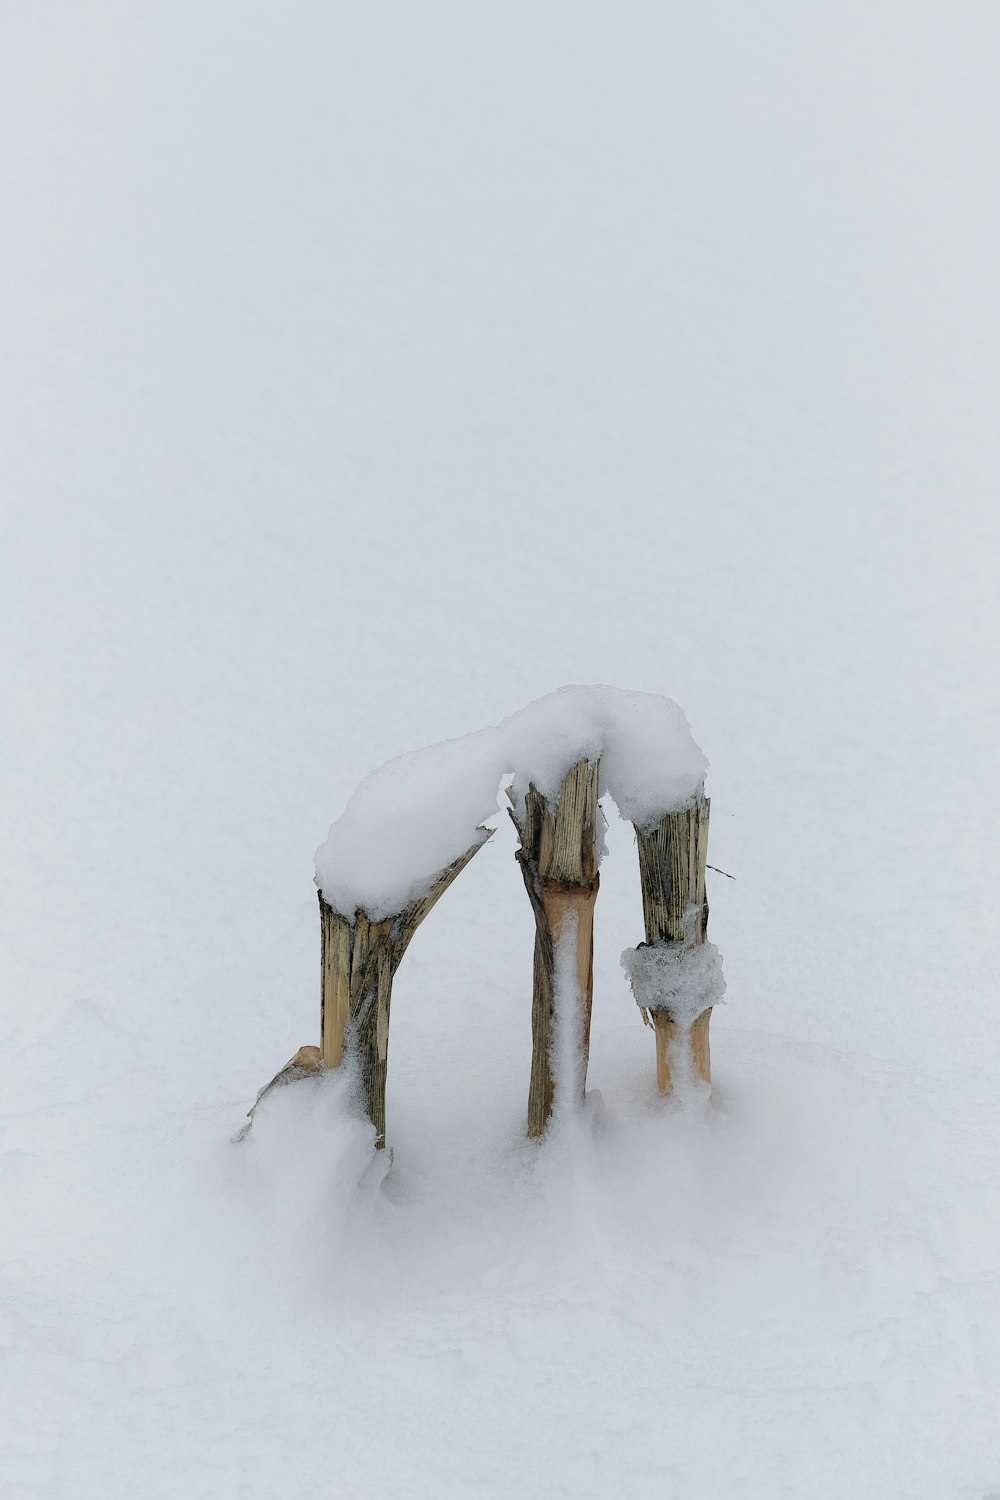 a couple of wooden posts covered in snow